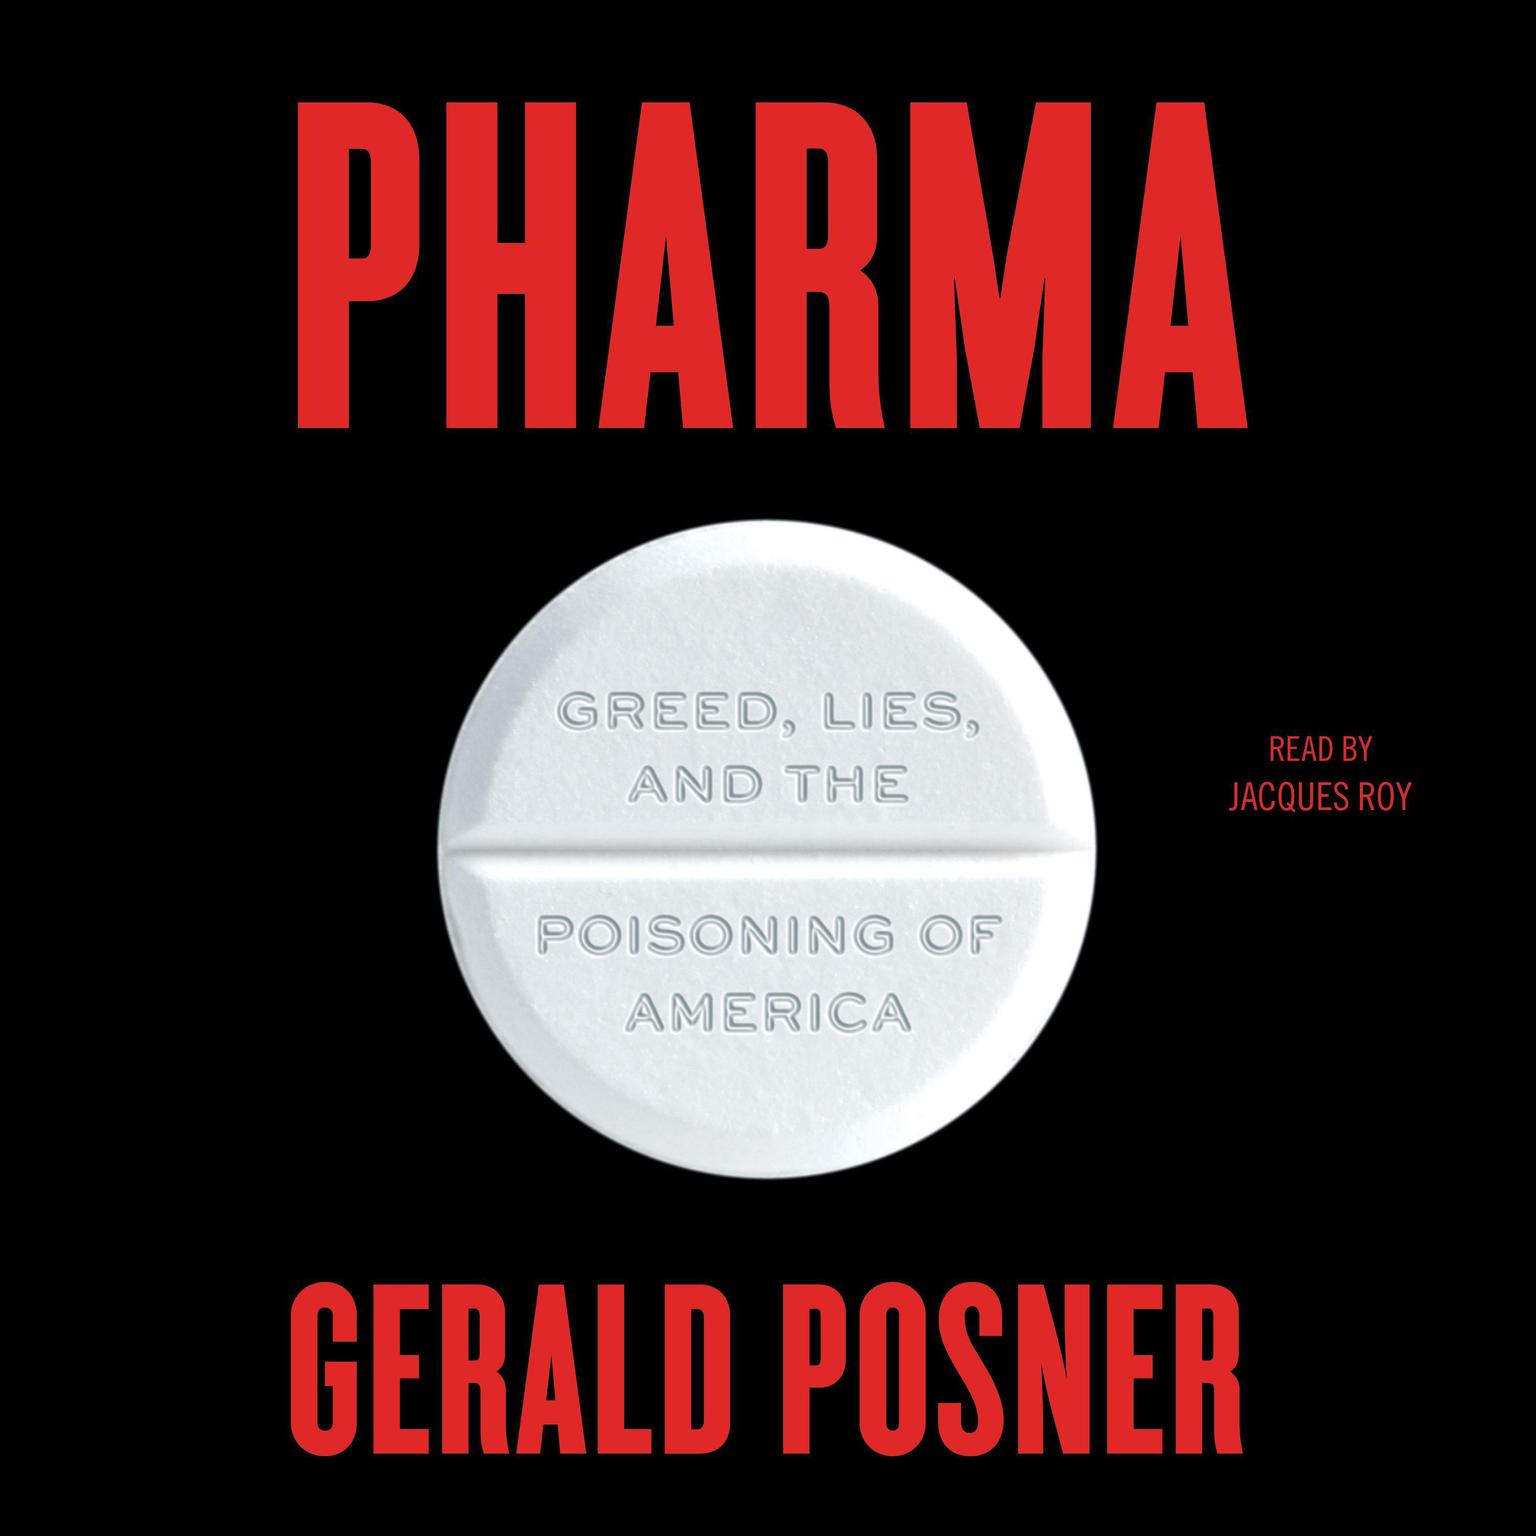 Pharma: Greed, Lies, and the Poisoning of America Audiobook, by Gerald Posner